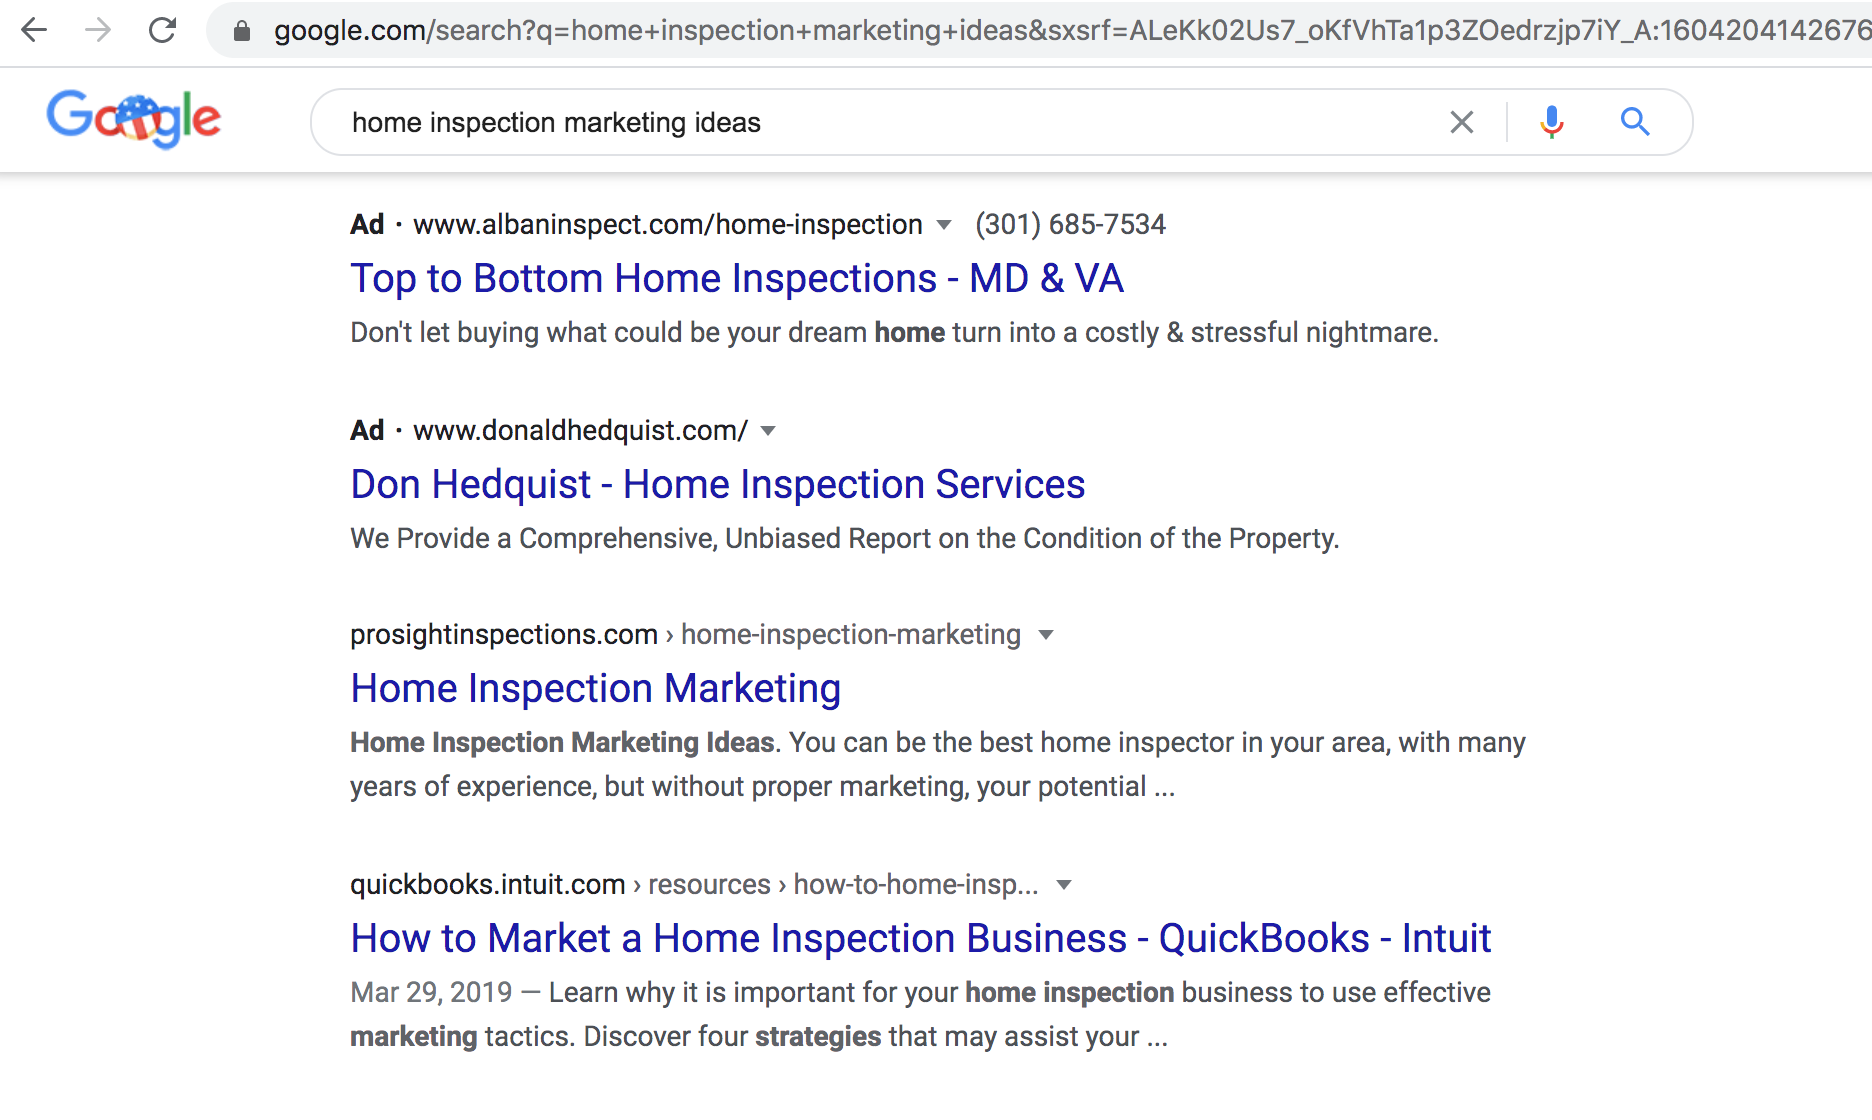 home-inspection-bas-ppc-advertising-example